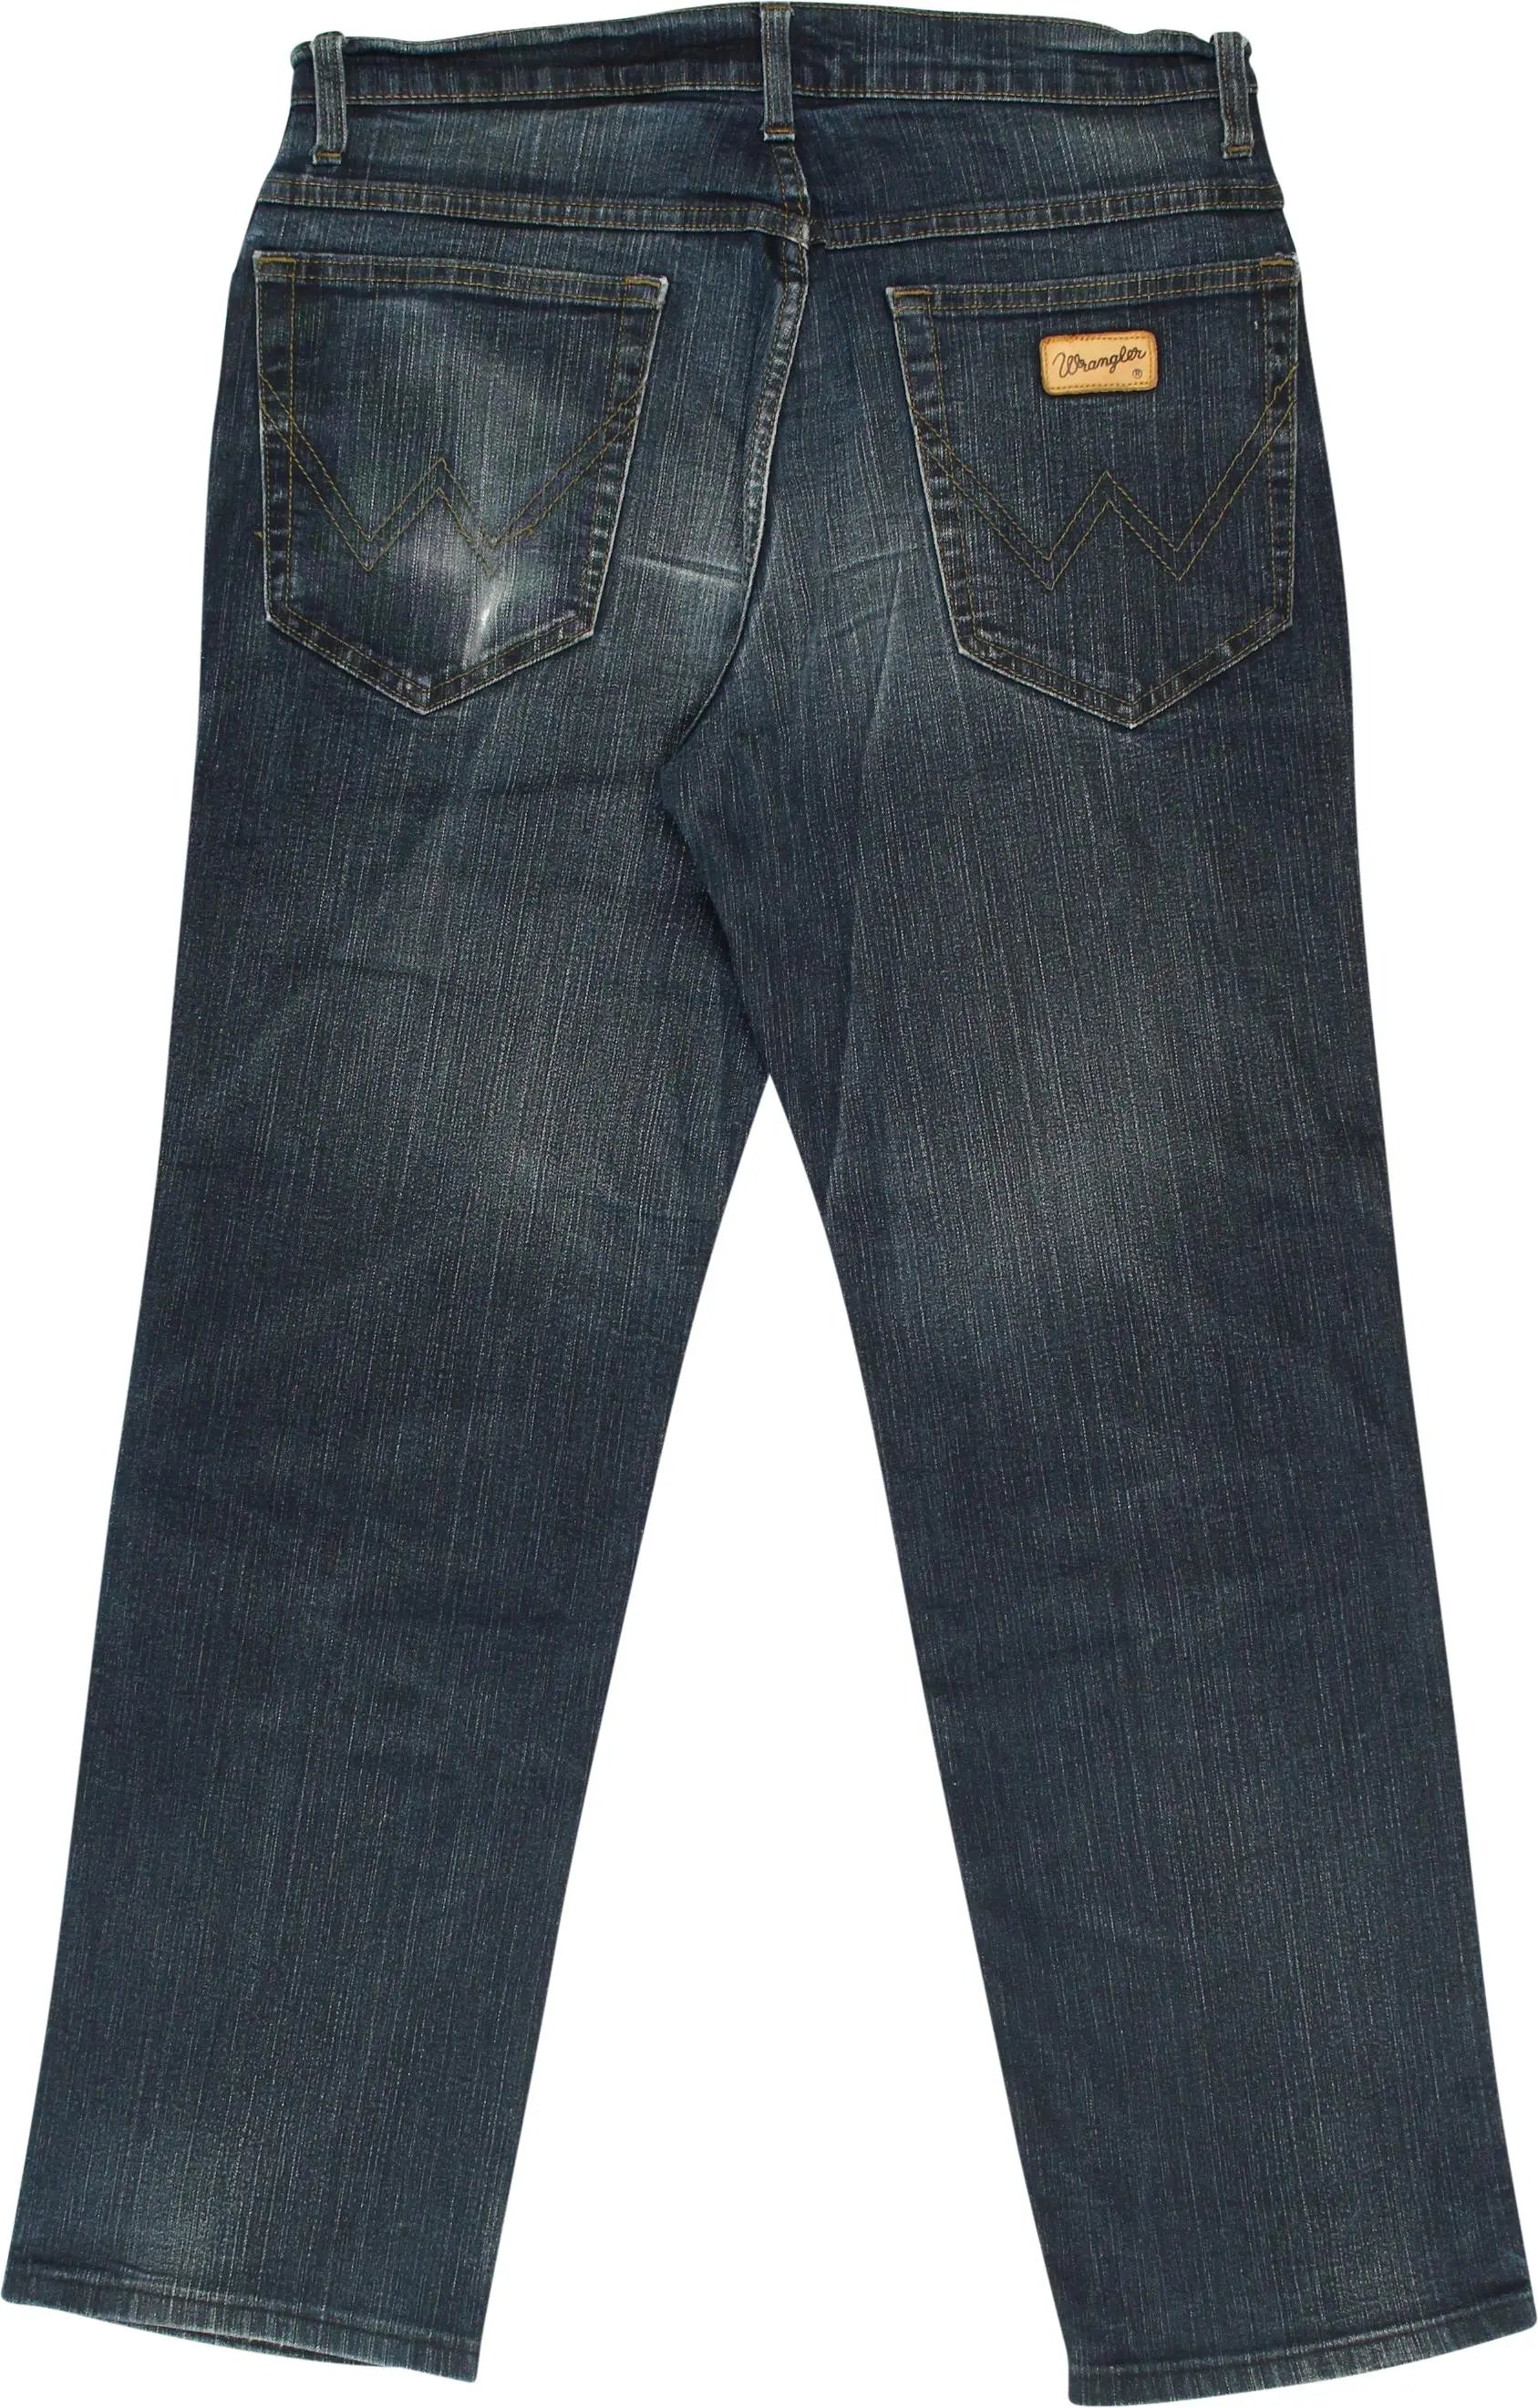 Wrangler - Wrangler Texas Stretch Regular Fit Jeans- ThriftTale.com - Vintage and second handclothing